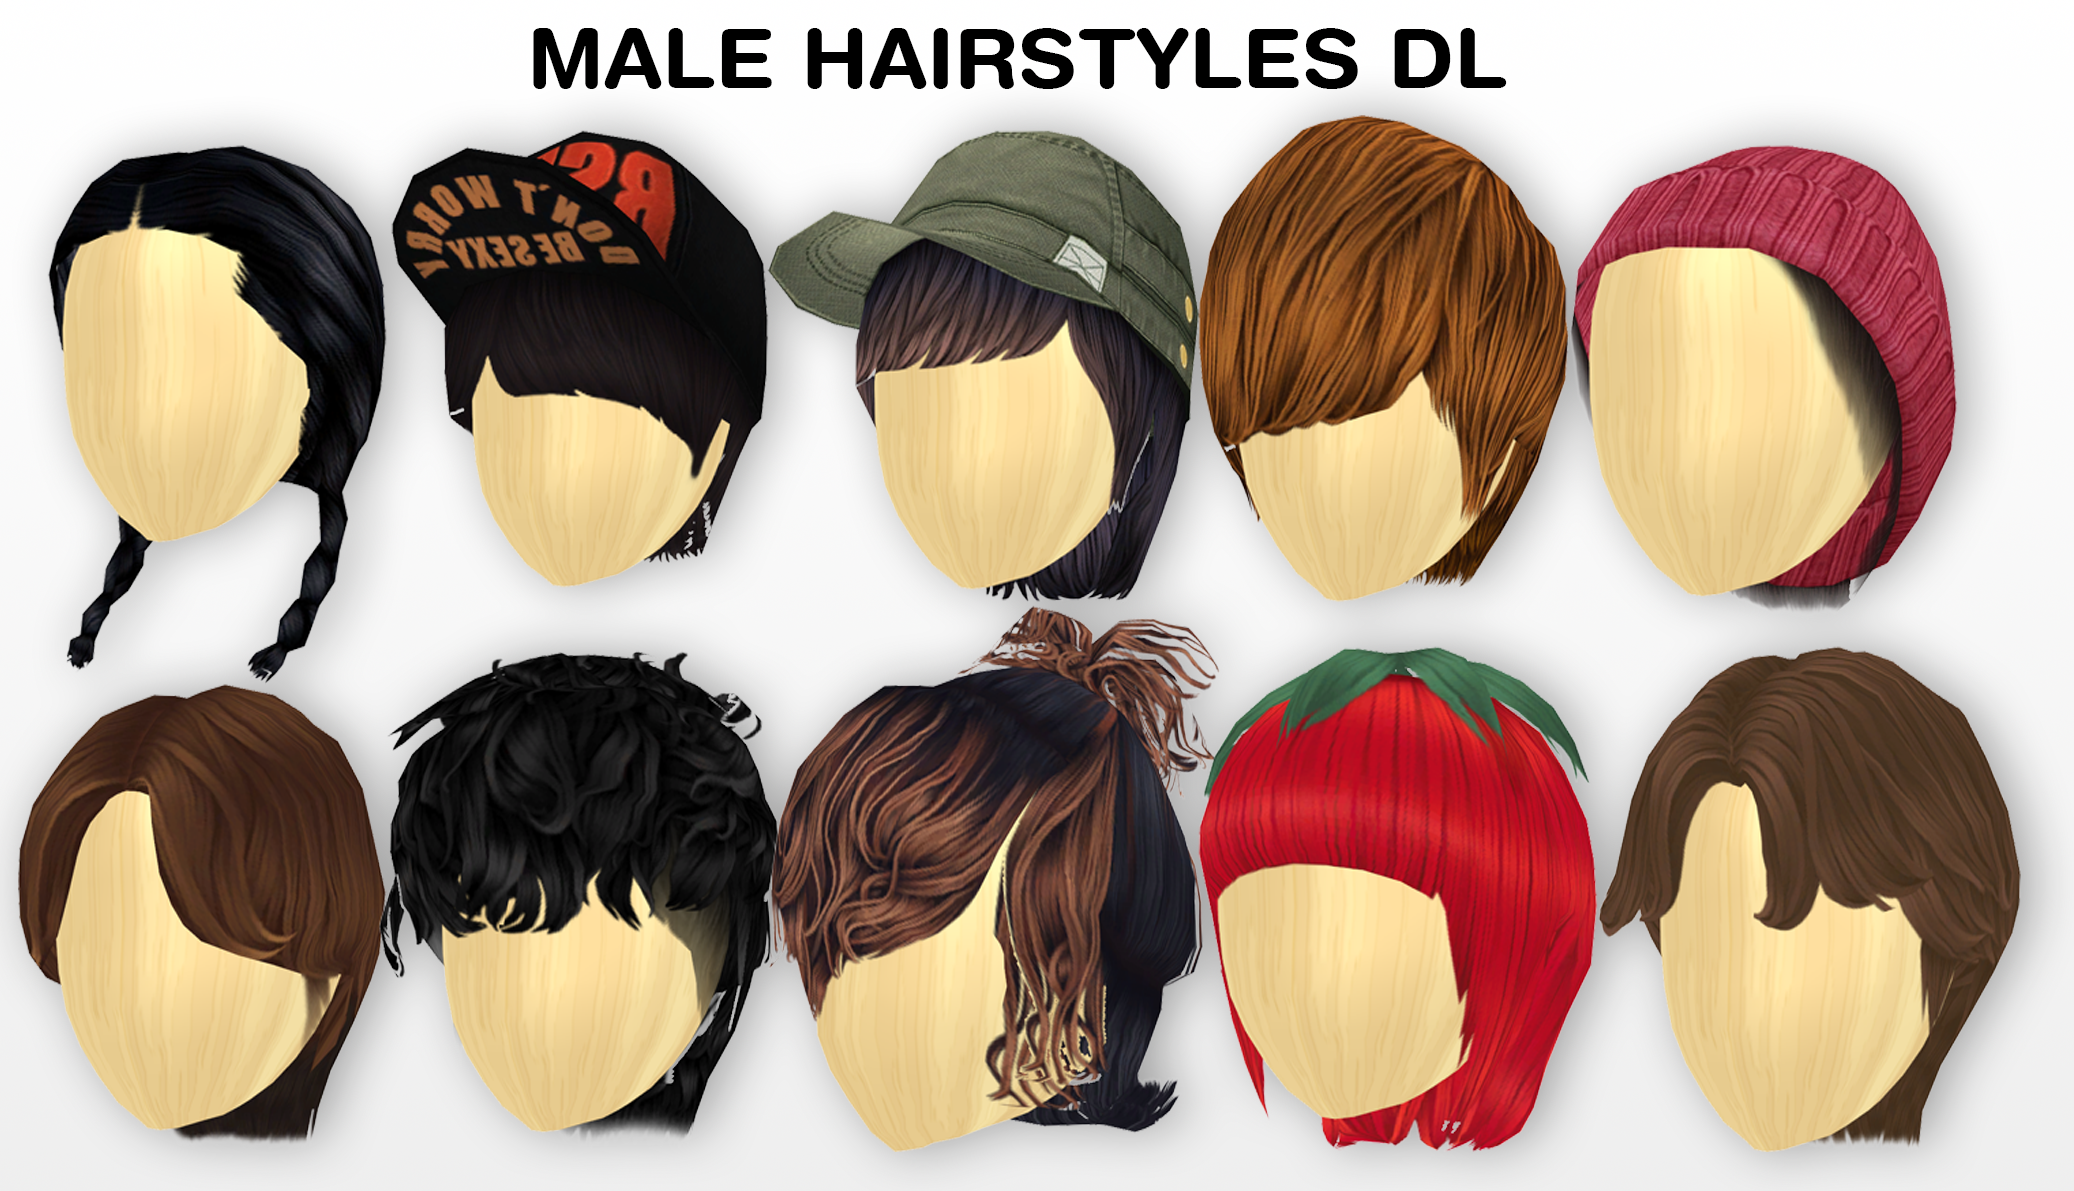 MMD Male Hairstyles DL